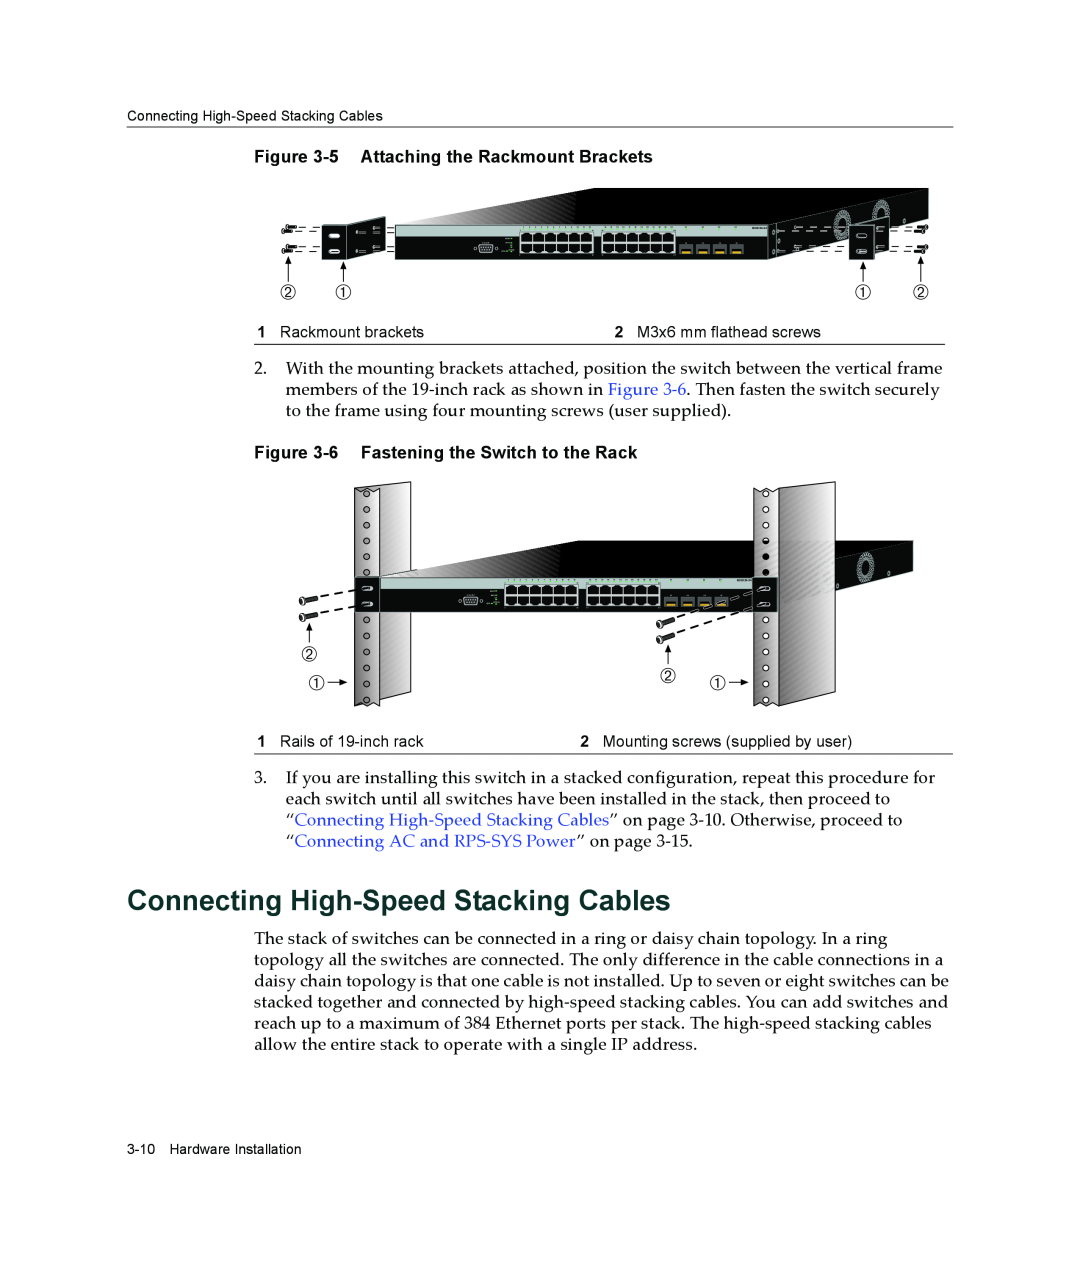 Enterasys Networks B2G124-24 manual Connecting High-Speed Stacking Cables, 5 Attaching the Rackmount Brackets 